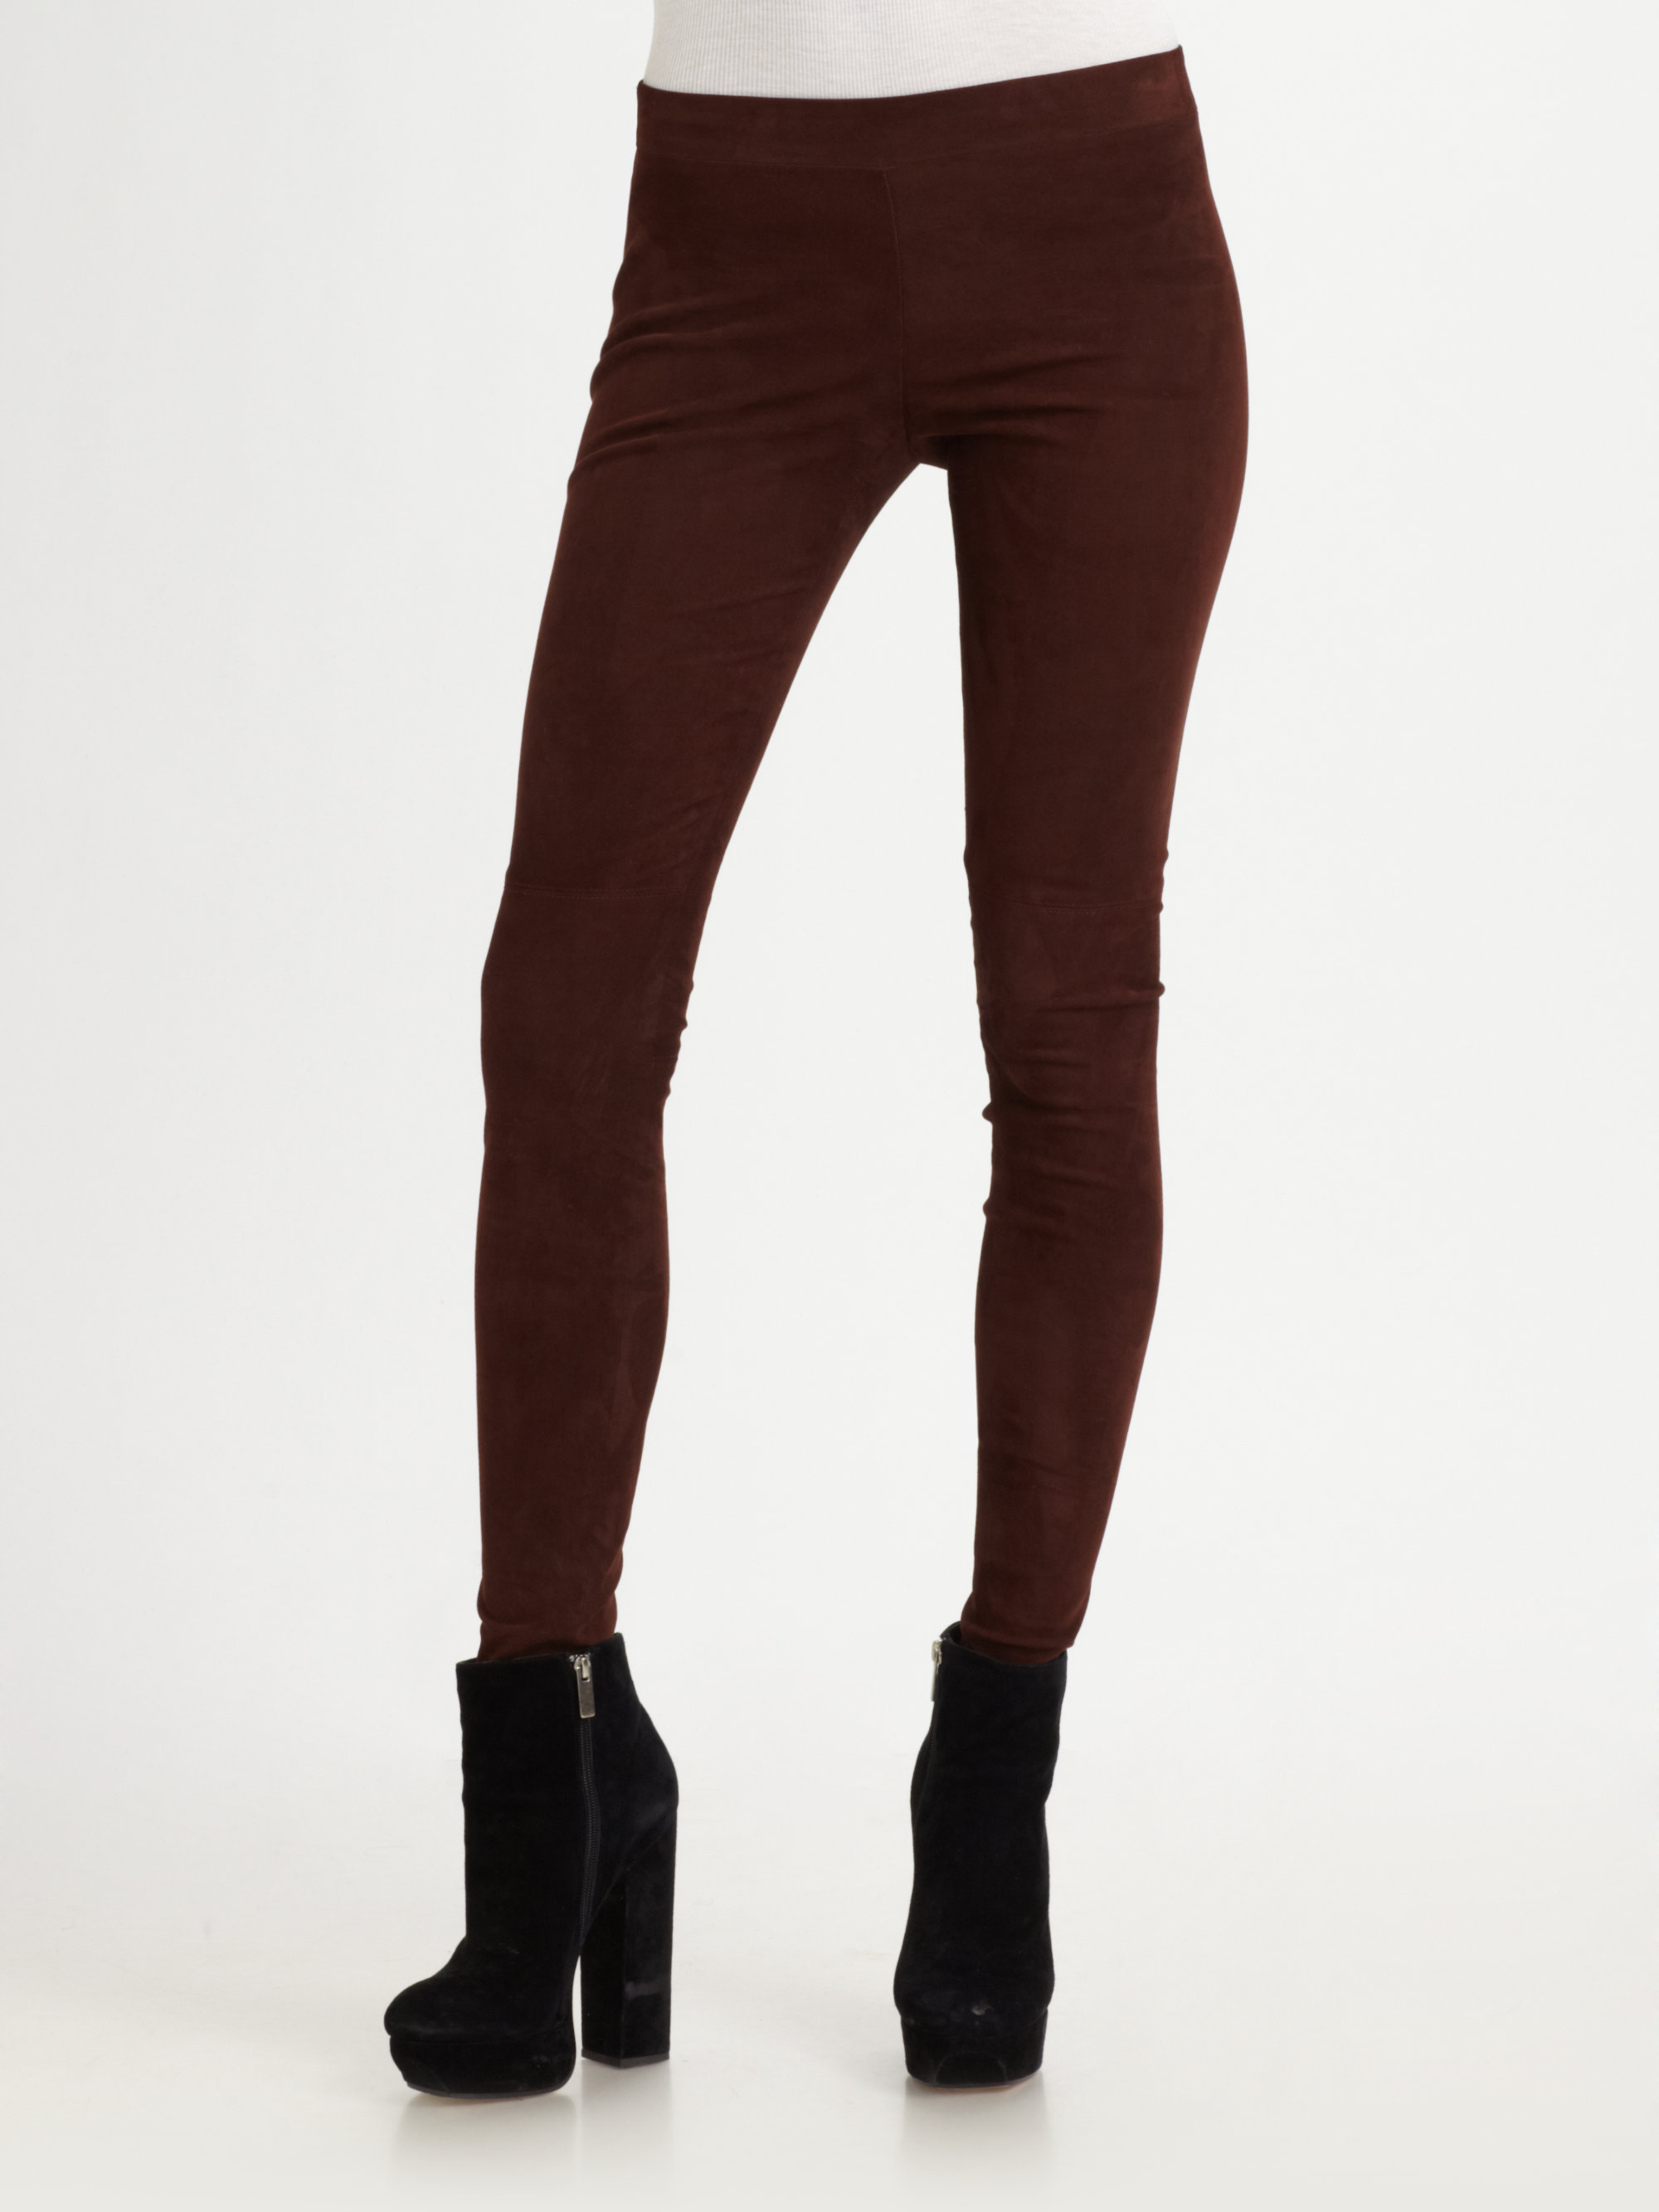 Light Brown Leggings For Women  International Society of Precision  Agriculture